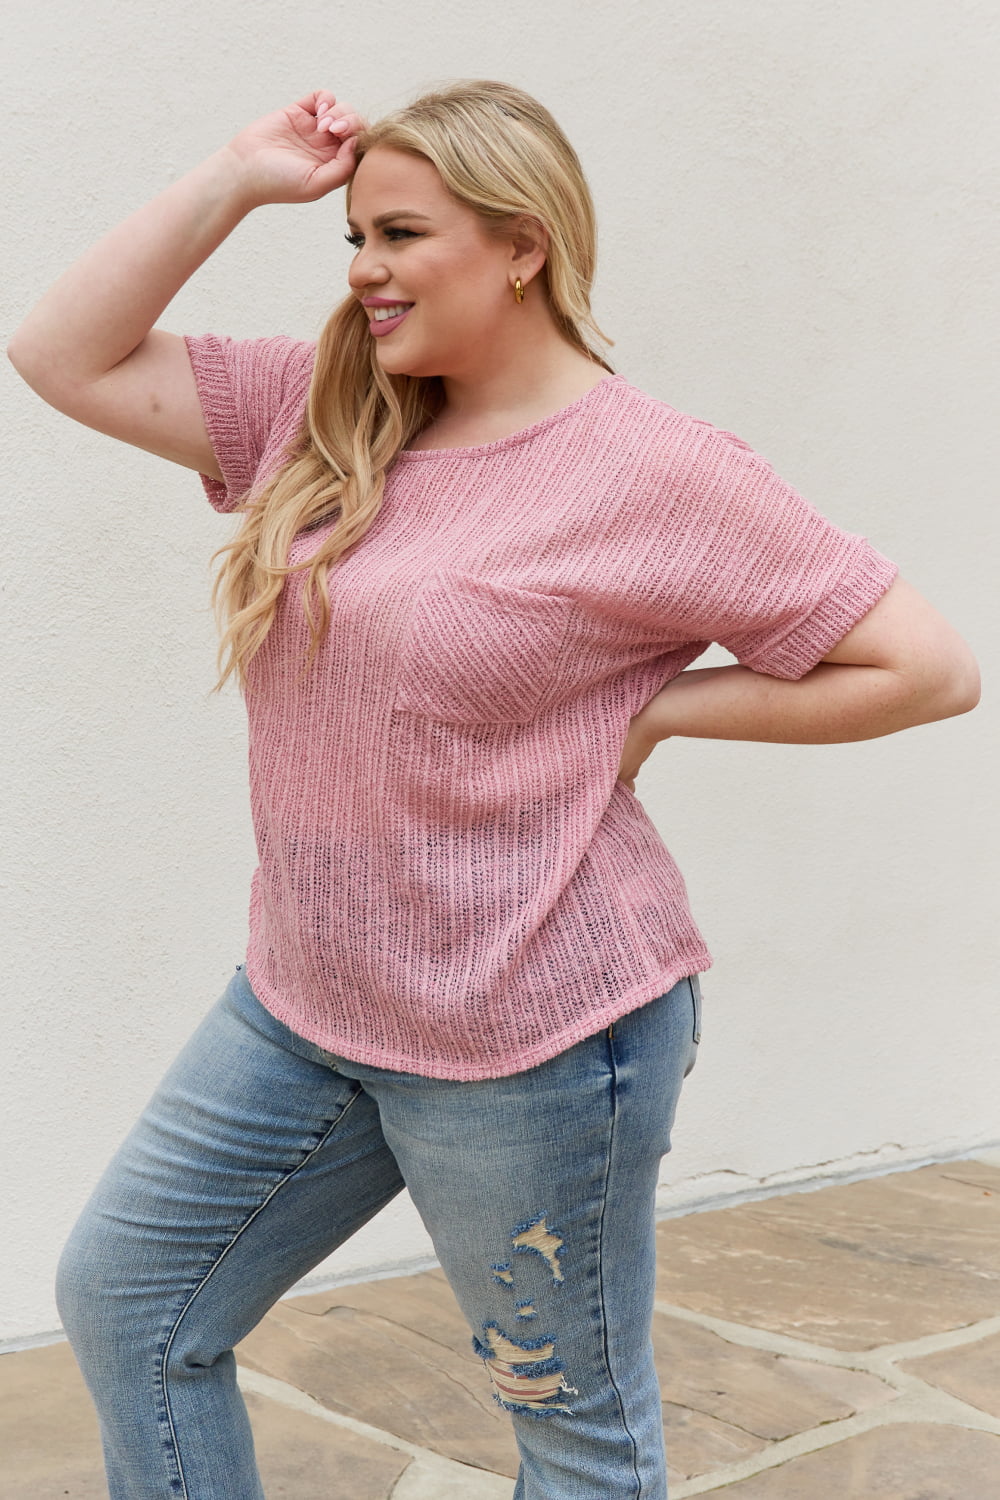 Chunky Knit Short Sleeve Top in Mauve - Camis & Tops - Shirts & Tops - 9 - 2024